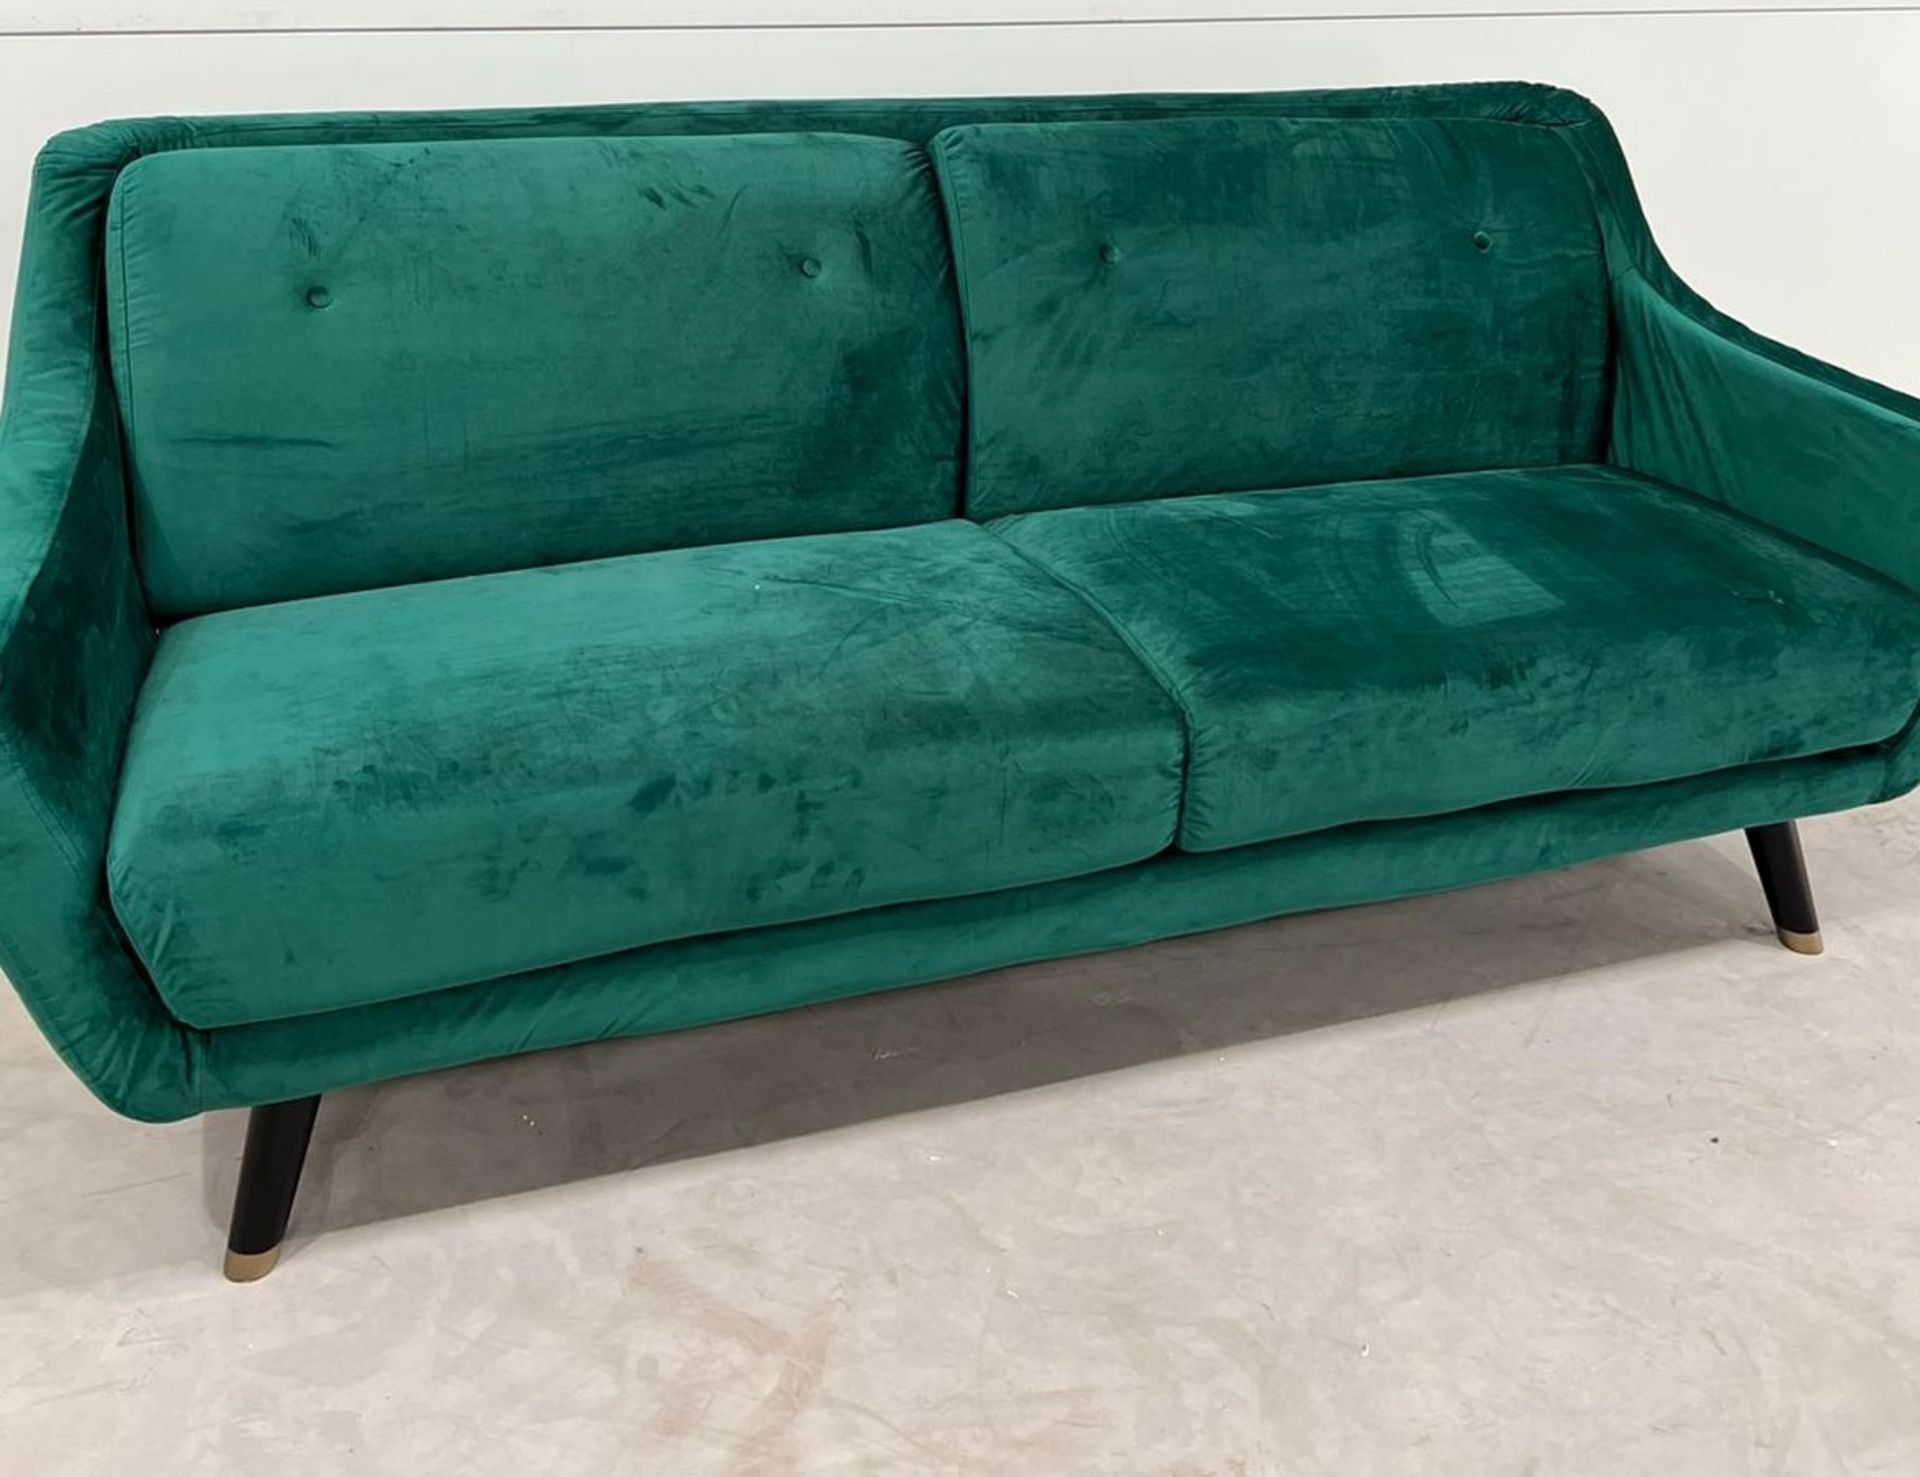 Lance Three Seater Sofa In Green Velvet Legs Finished In Black Legs This Welcoming Shape Is Hugged - Bild 2 aus 3